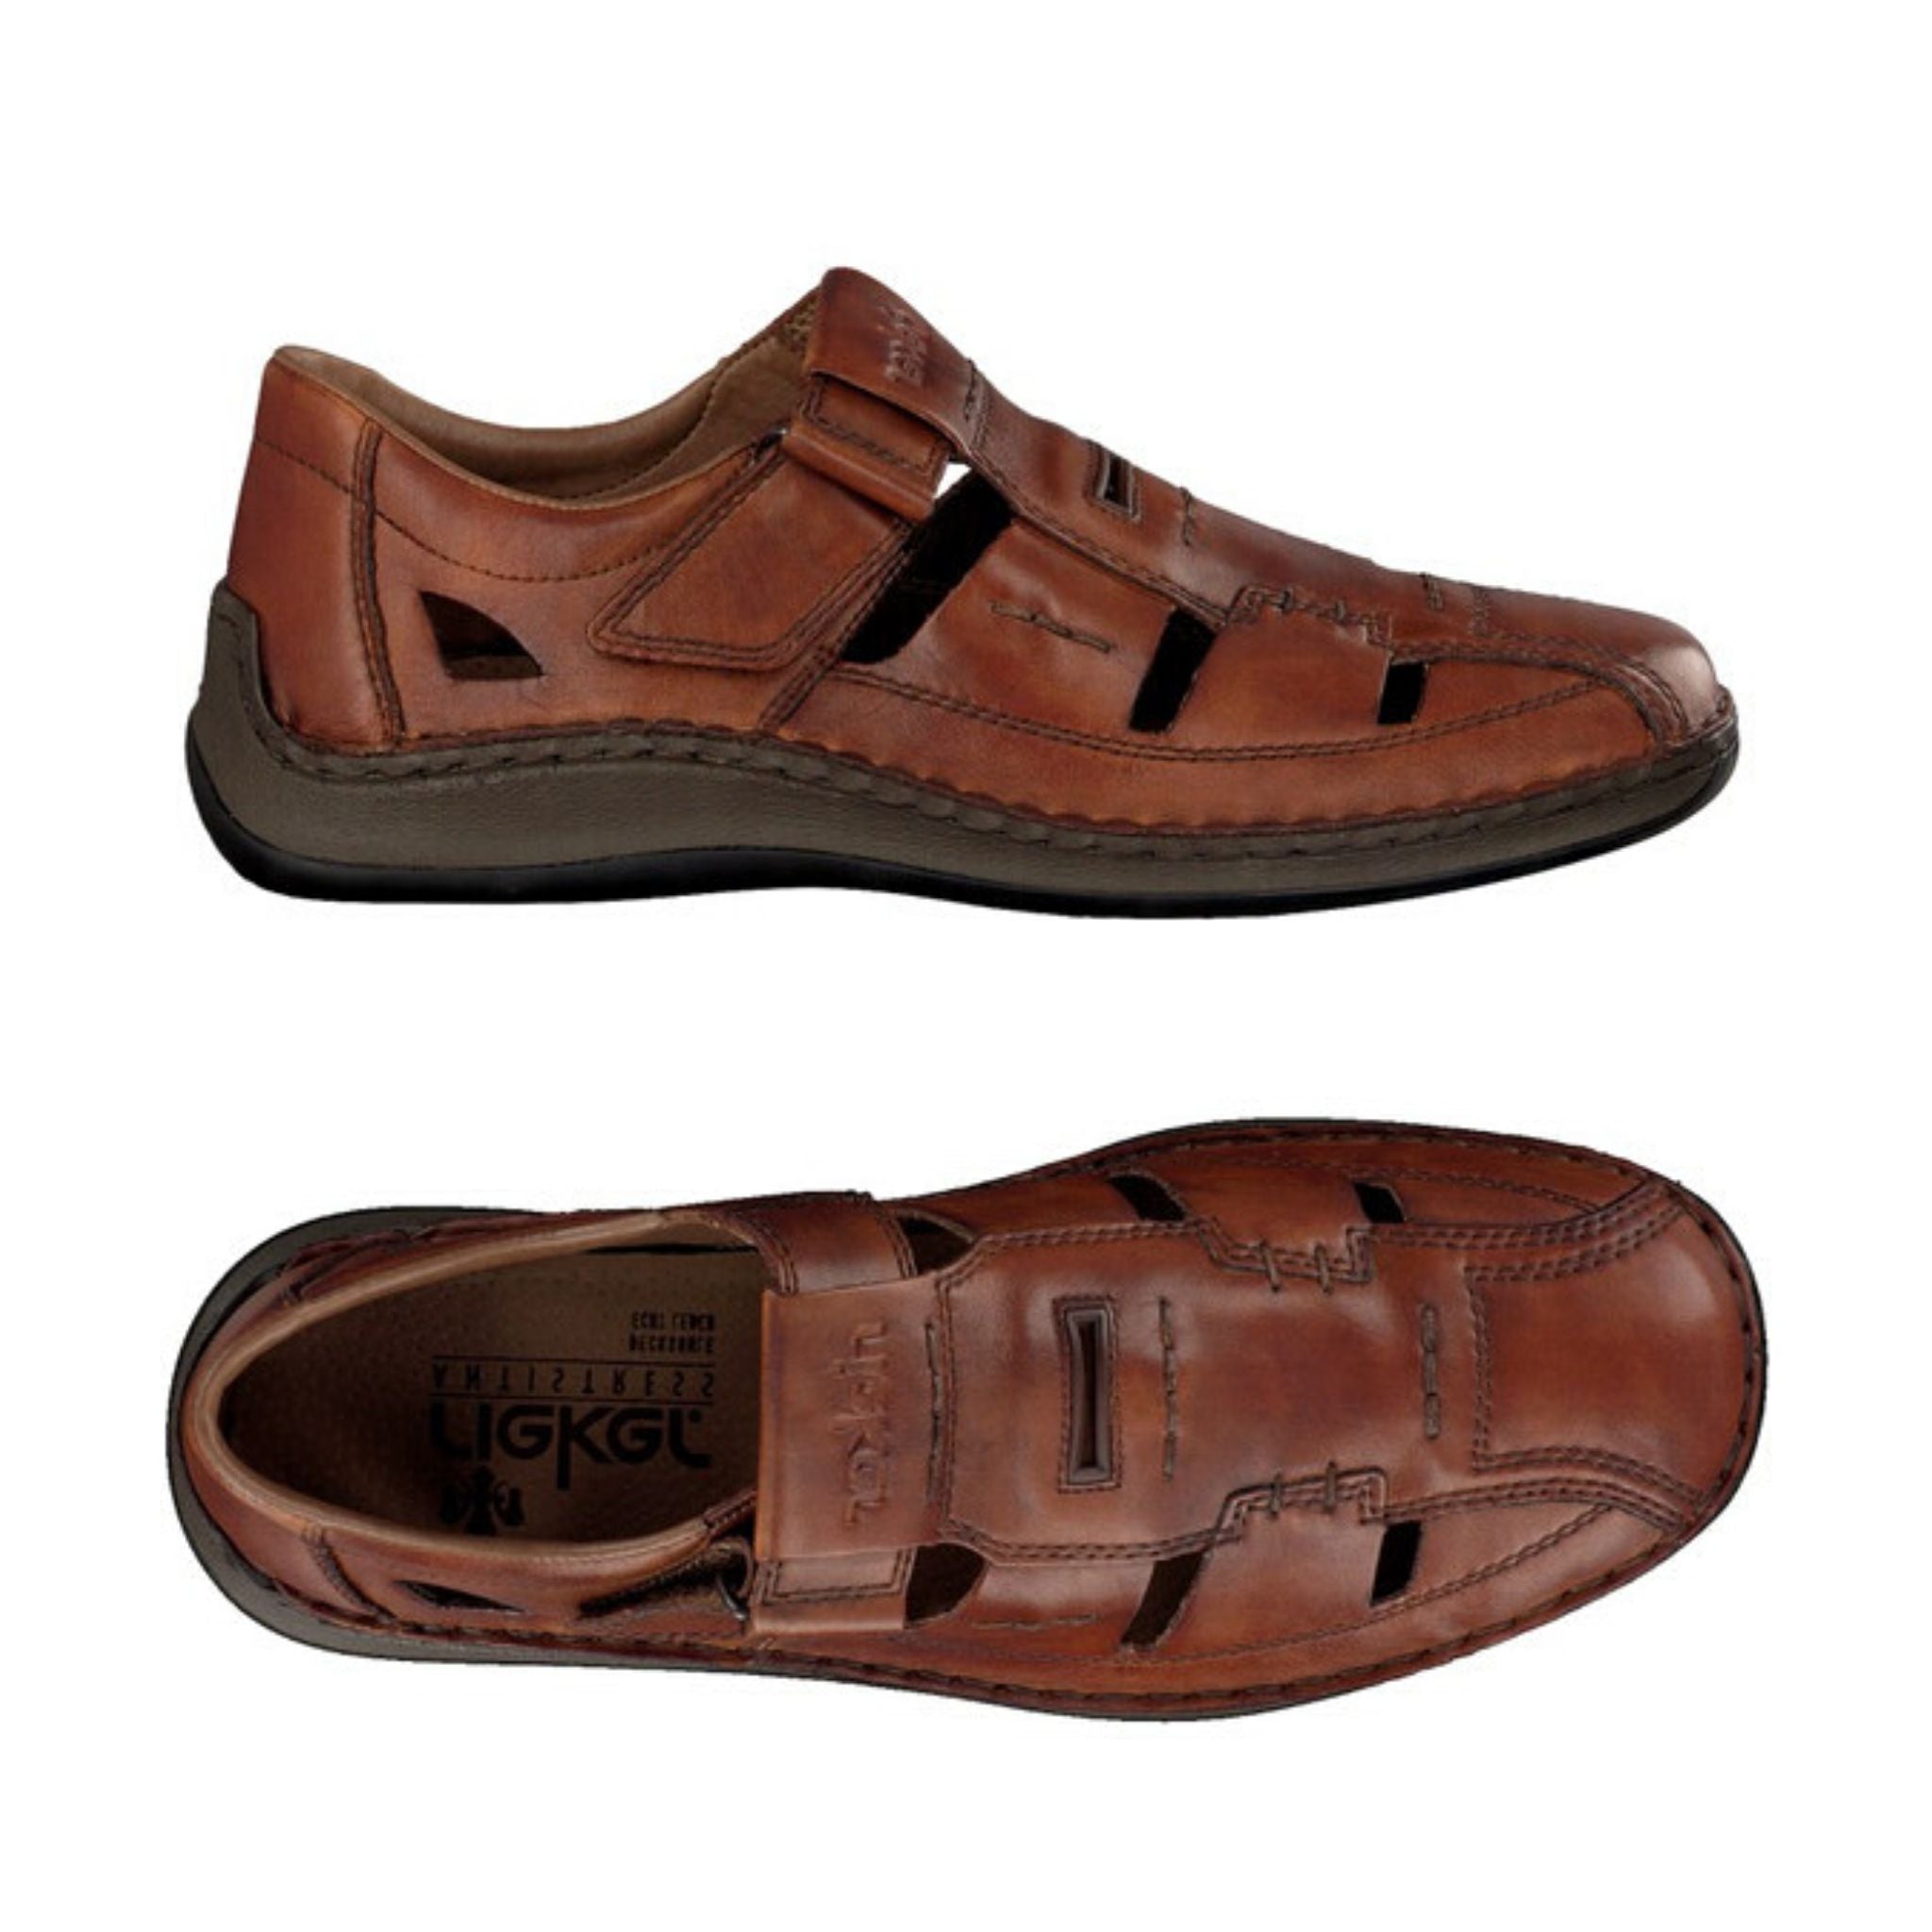 Top and side view of men's brown leather fisherman sandal made by Rieker.